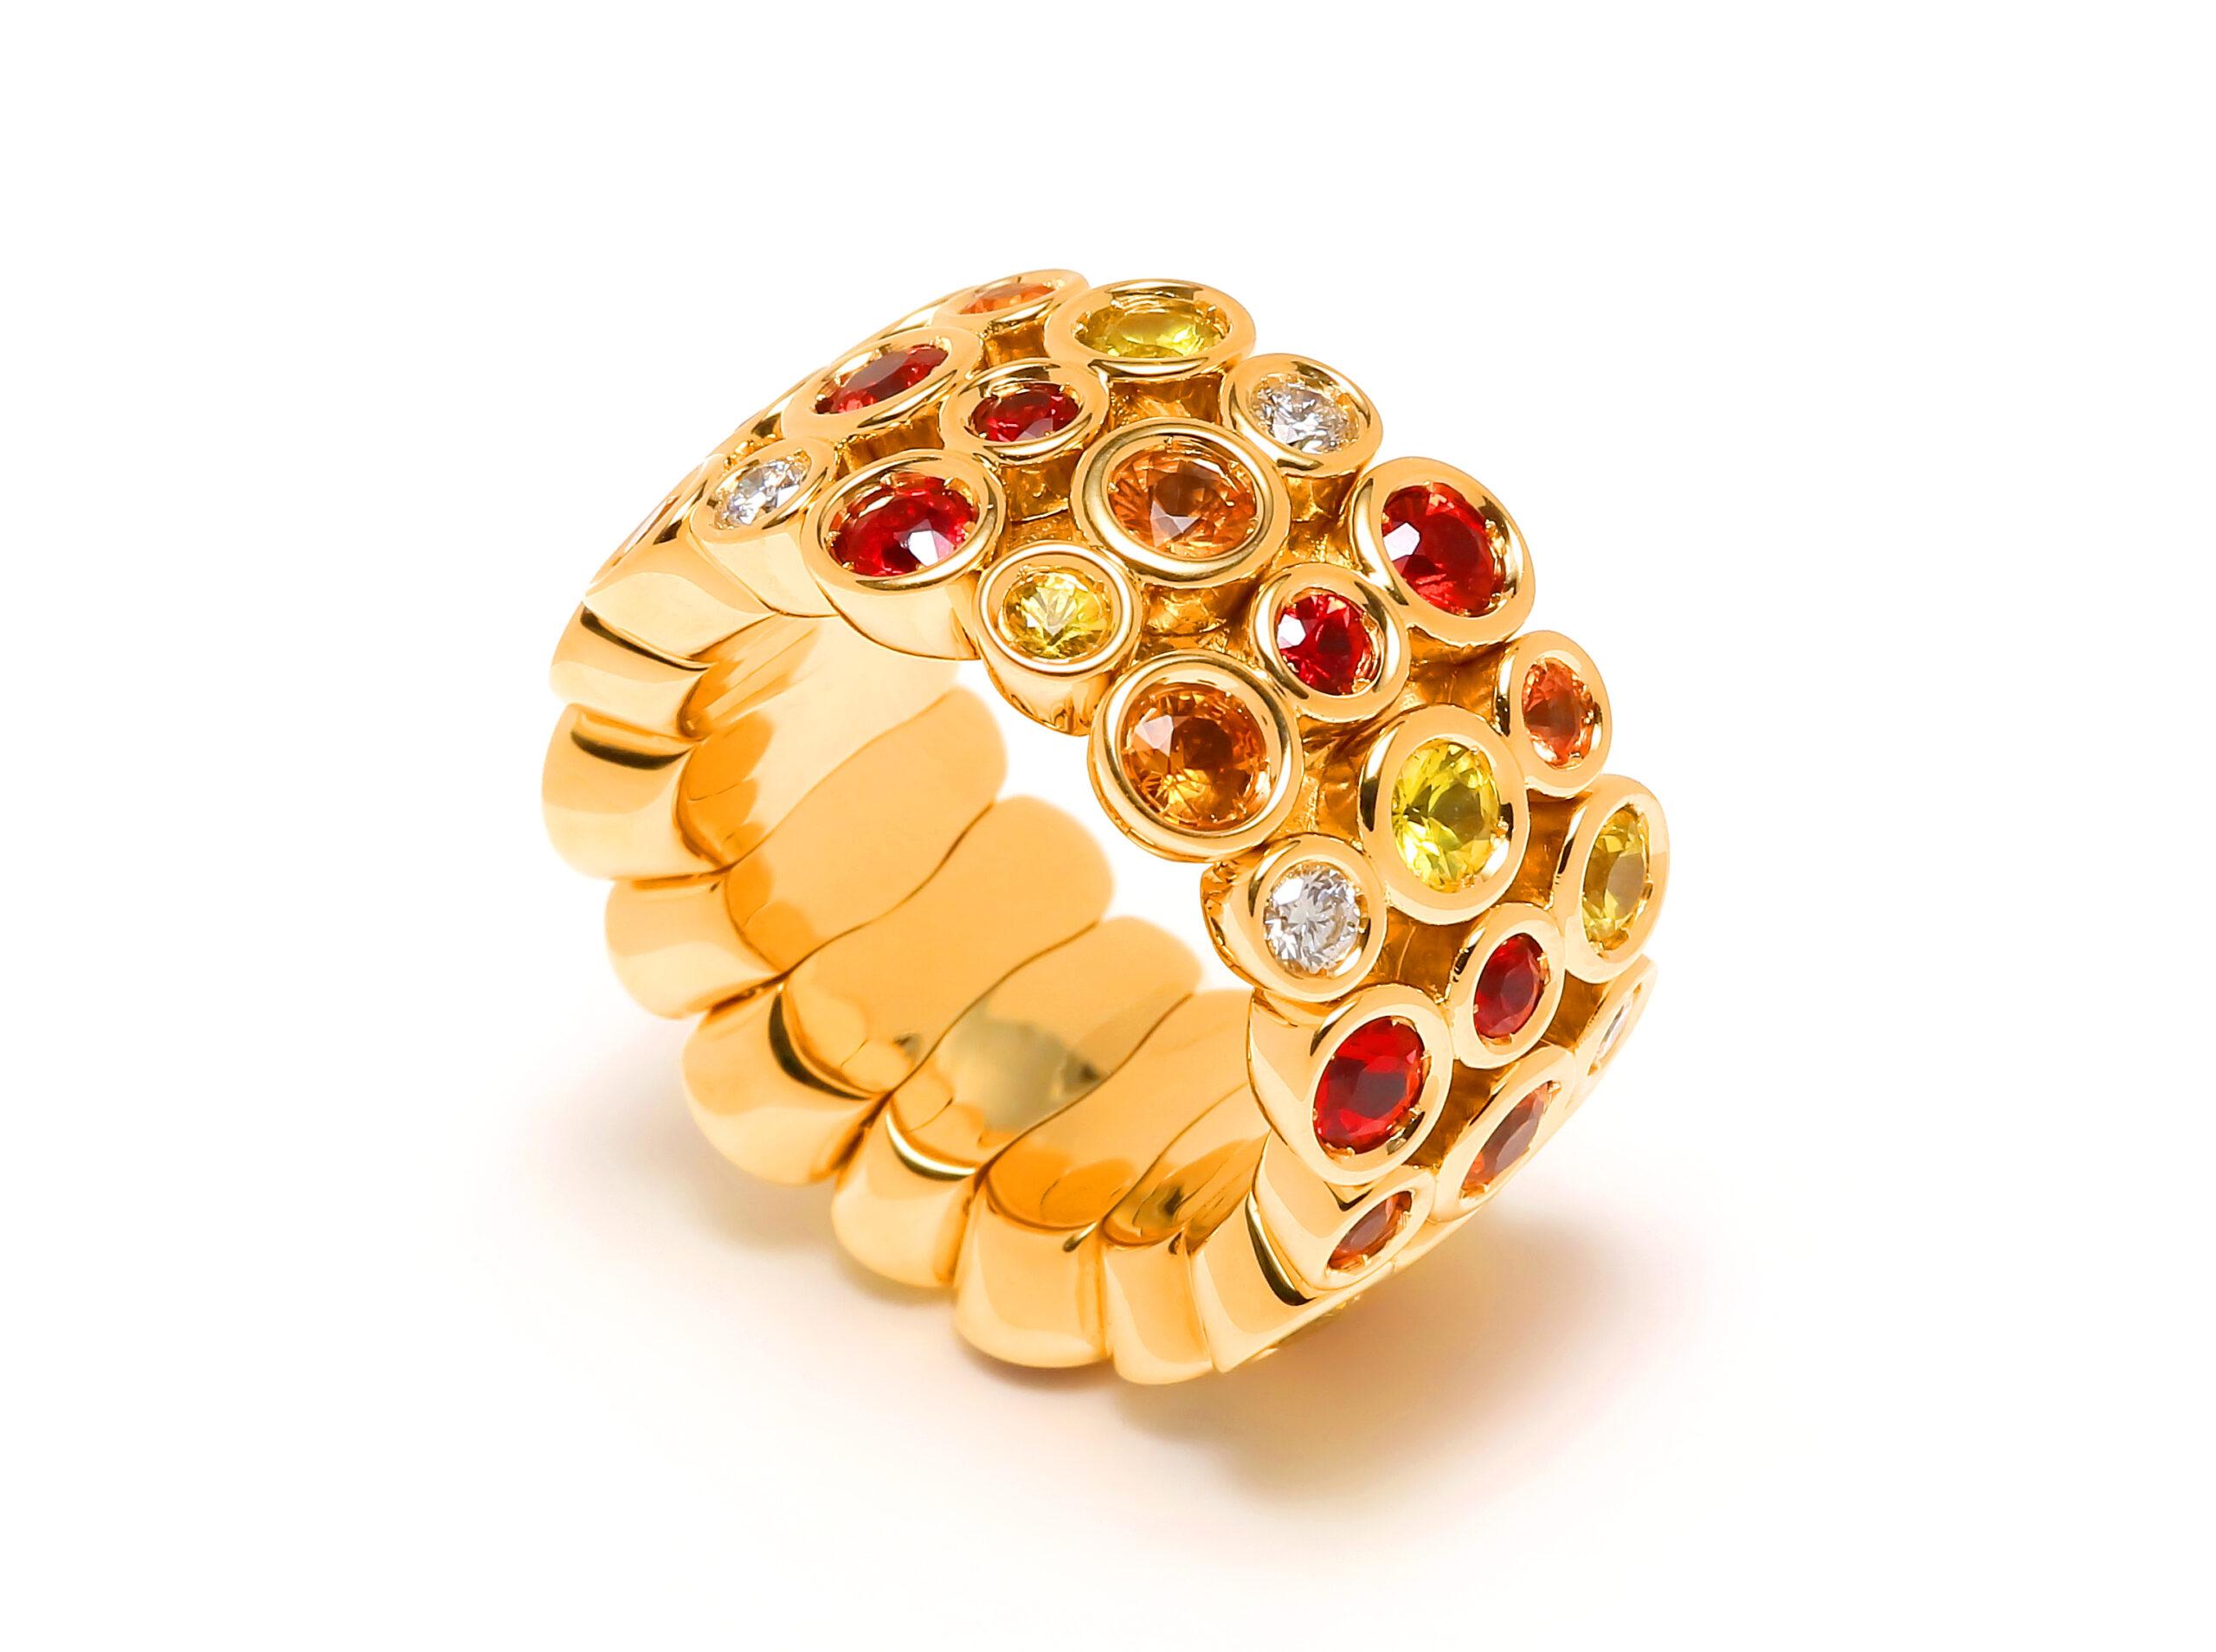 Modern Round Sapphires, Rubies & Diamonds Ring Set in 18K Yellow Gold For Sale 4